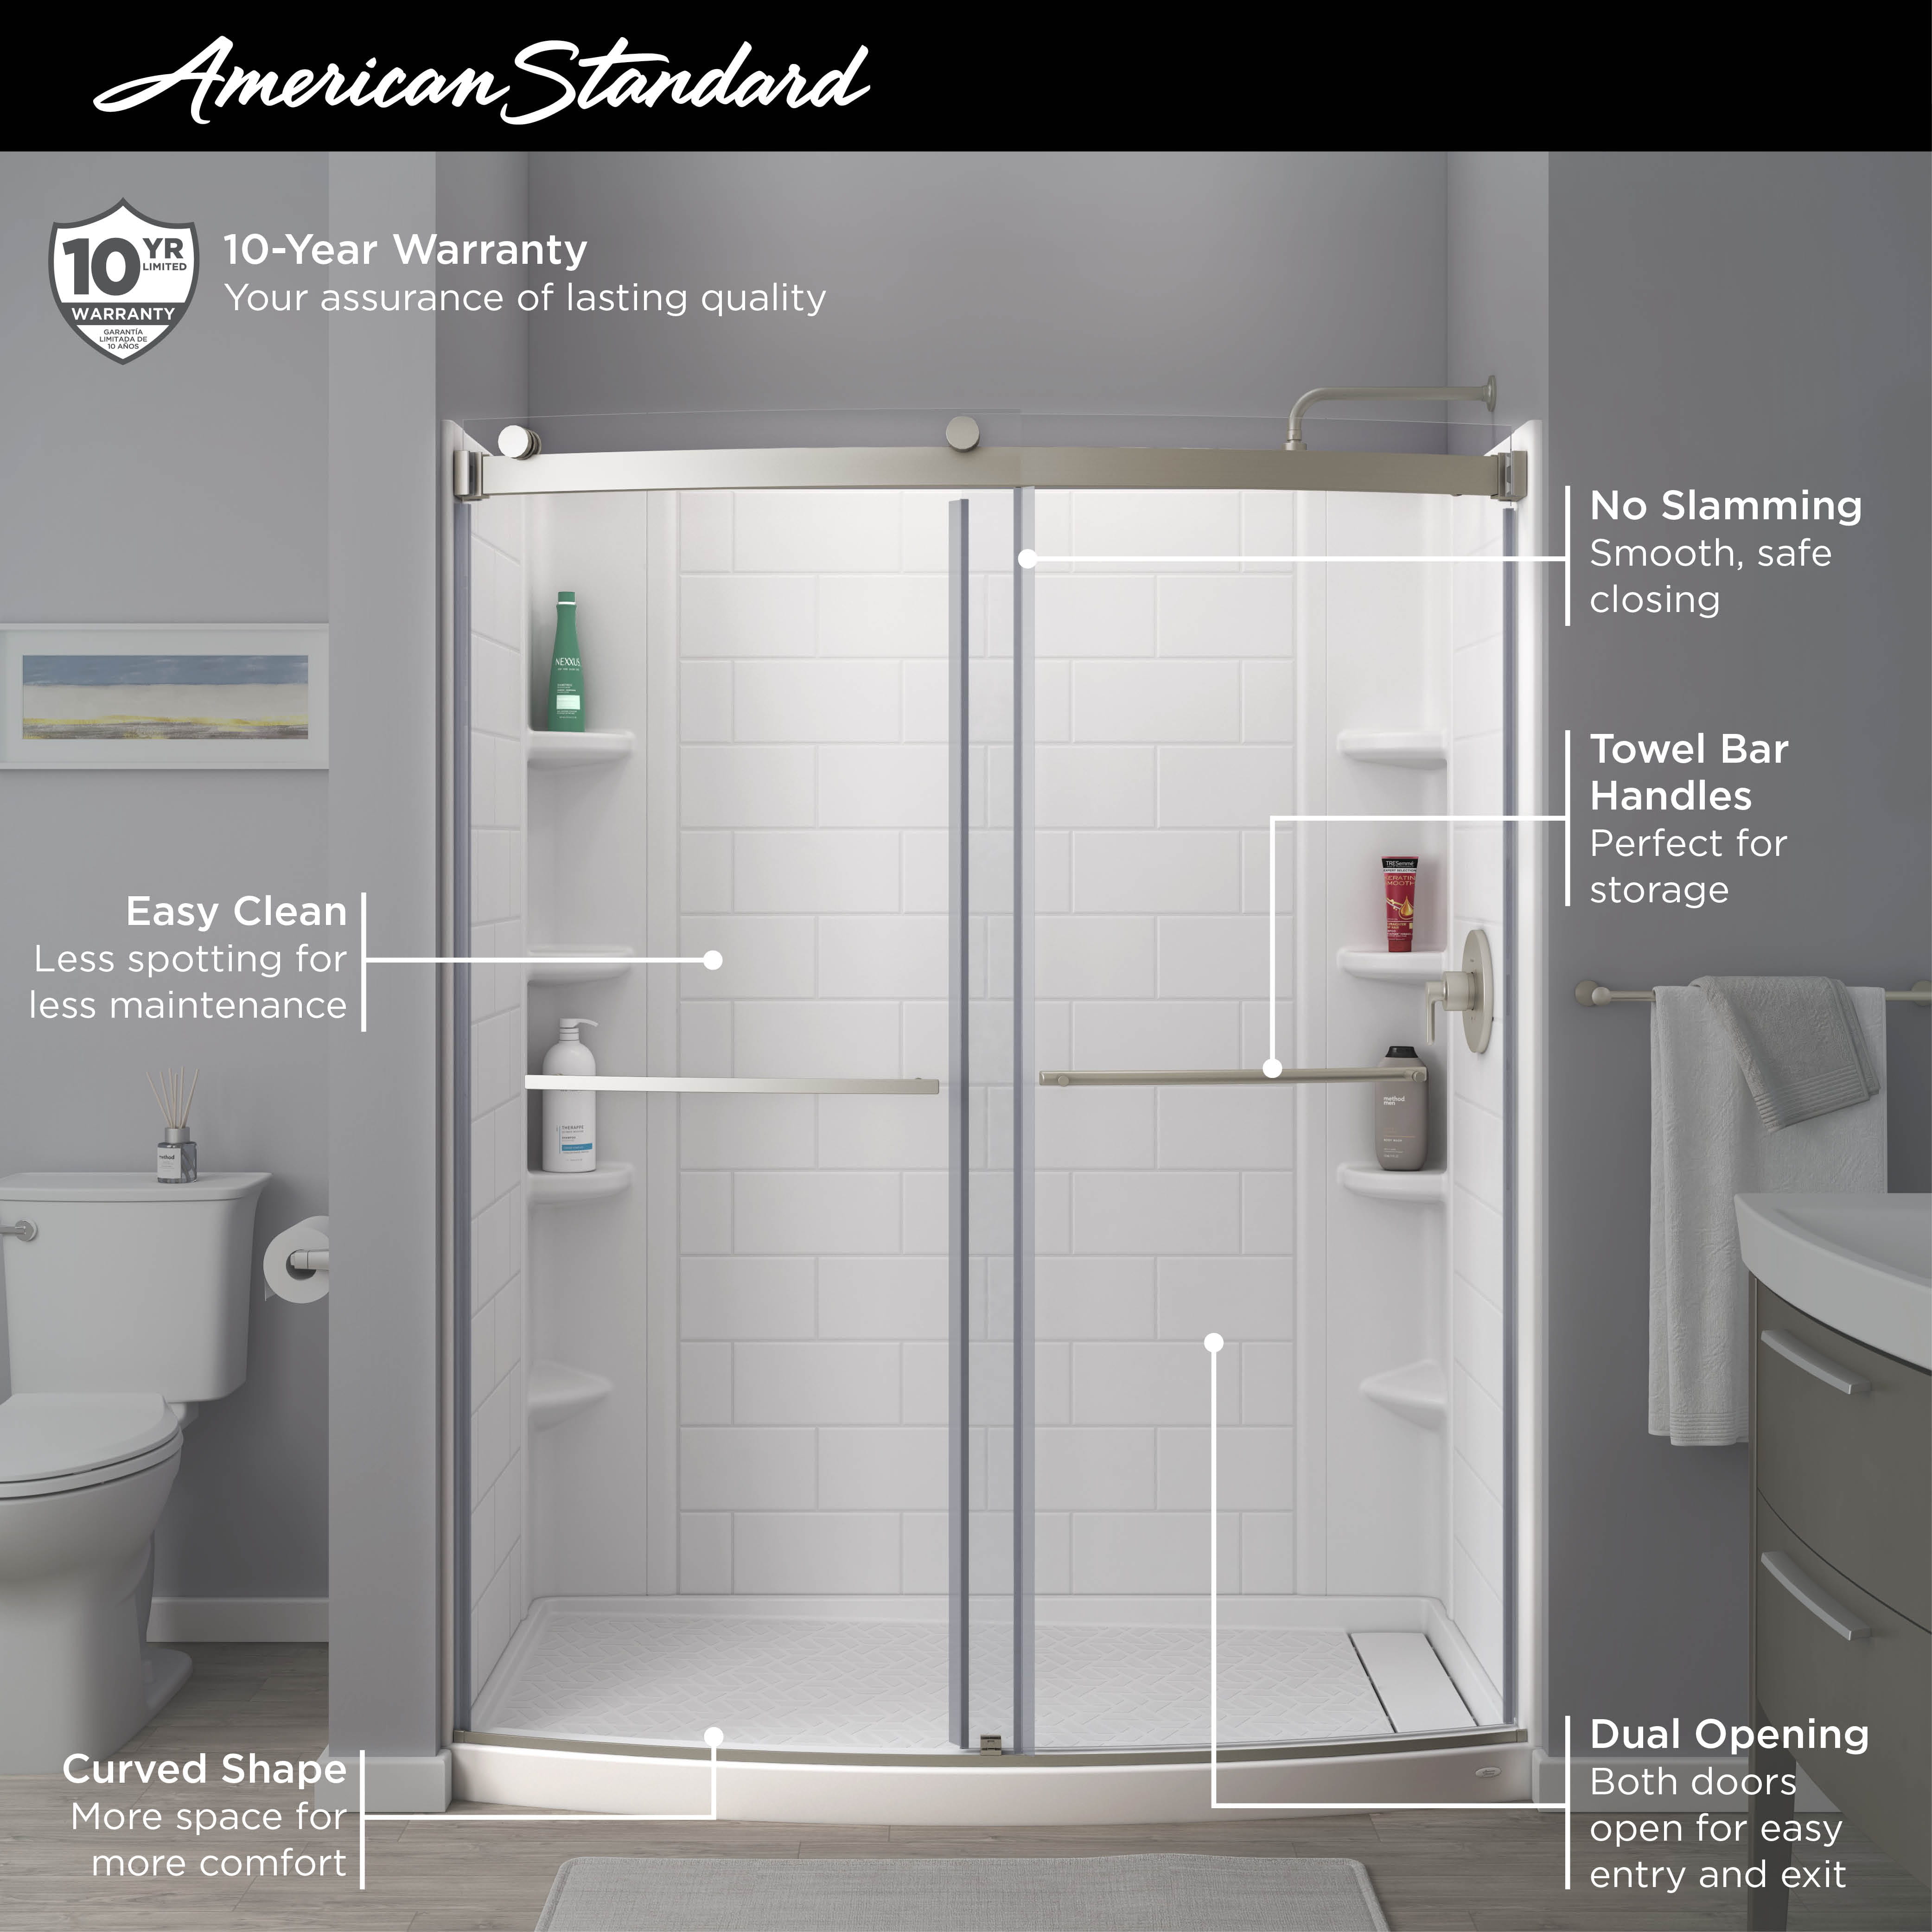 Curved Shower Doors: Transform Your Bathroom with Stylish Elegance